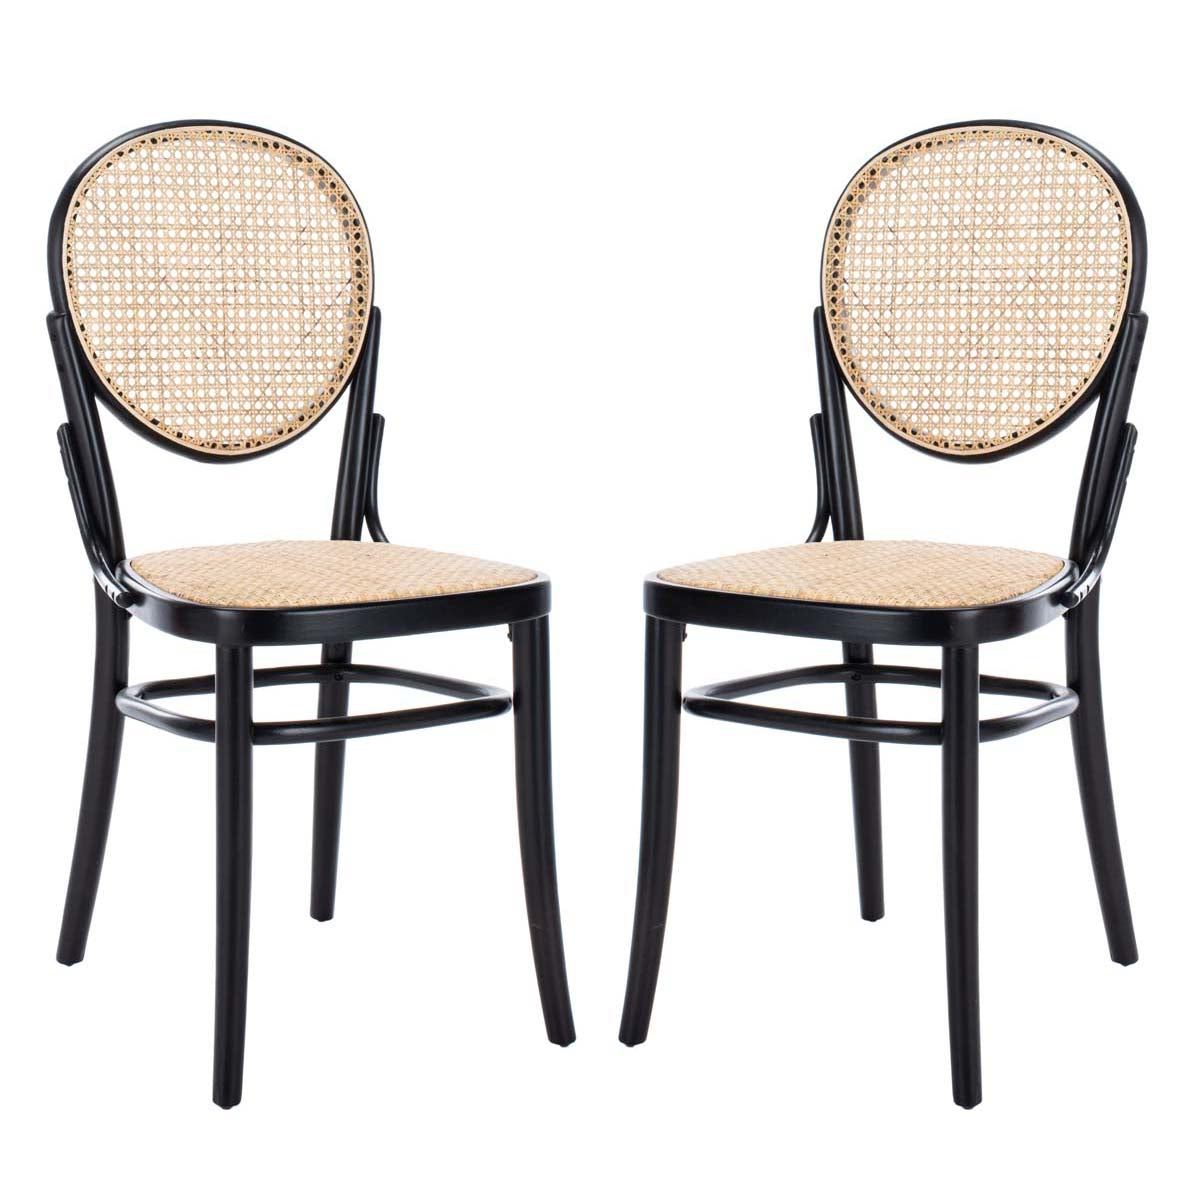 Safavieh Sonia Cane Dining Chair, DCH9504 - Black/Natural (Set of 2)